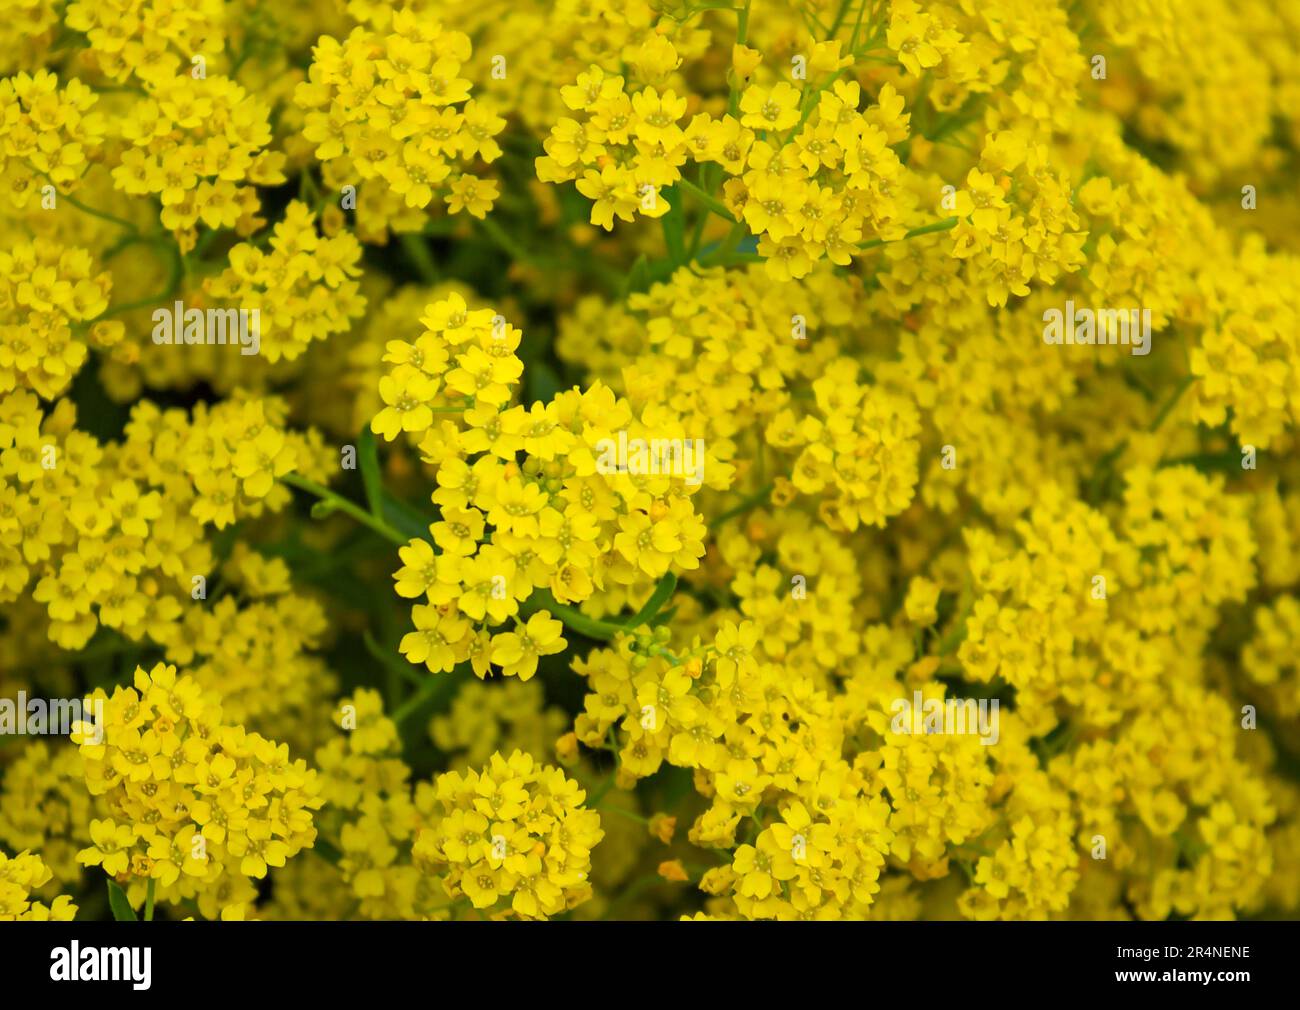 Closeup of Yellow flowers of Basket-of-gold plant or Aurinia saxatilis (Alyssum saxatile) in garden background. Blossom background. Stock Photo